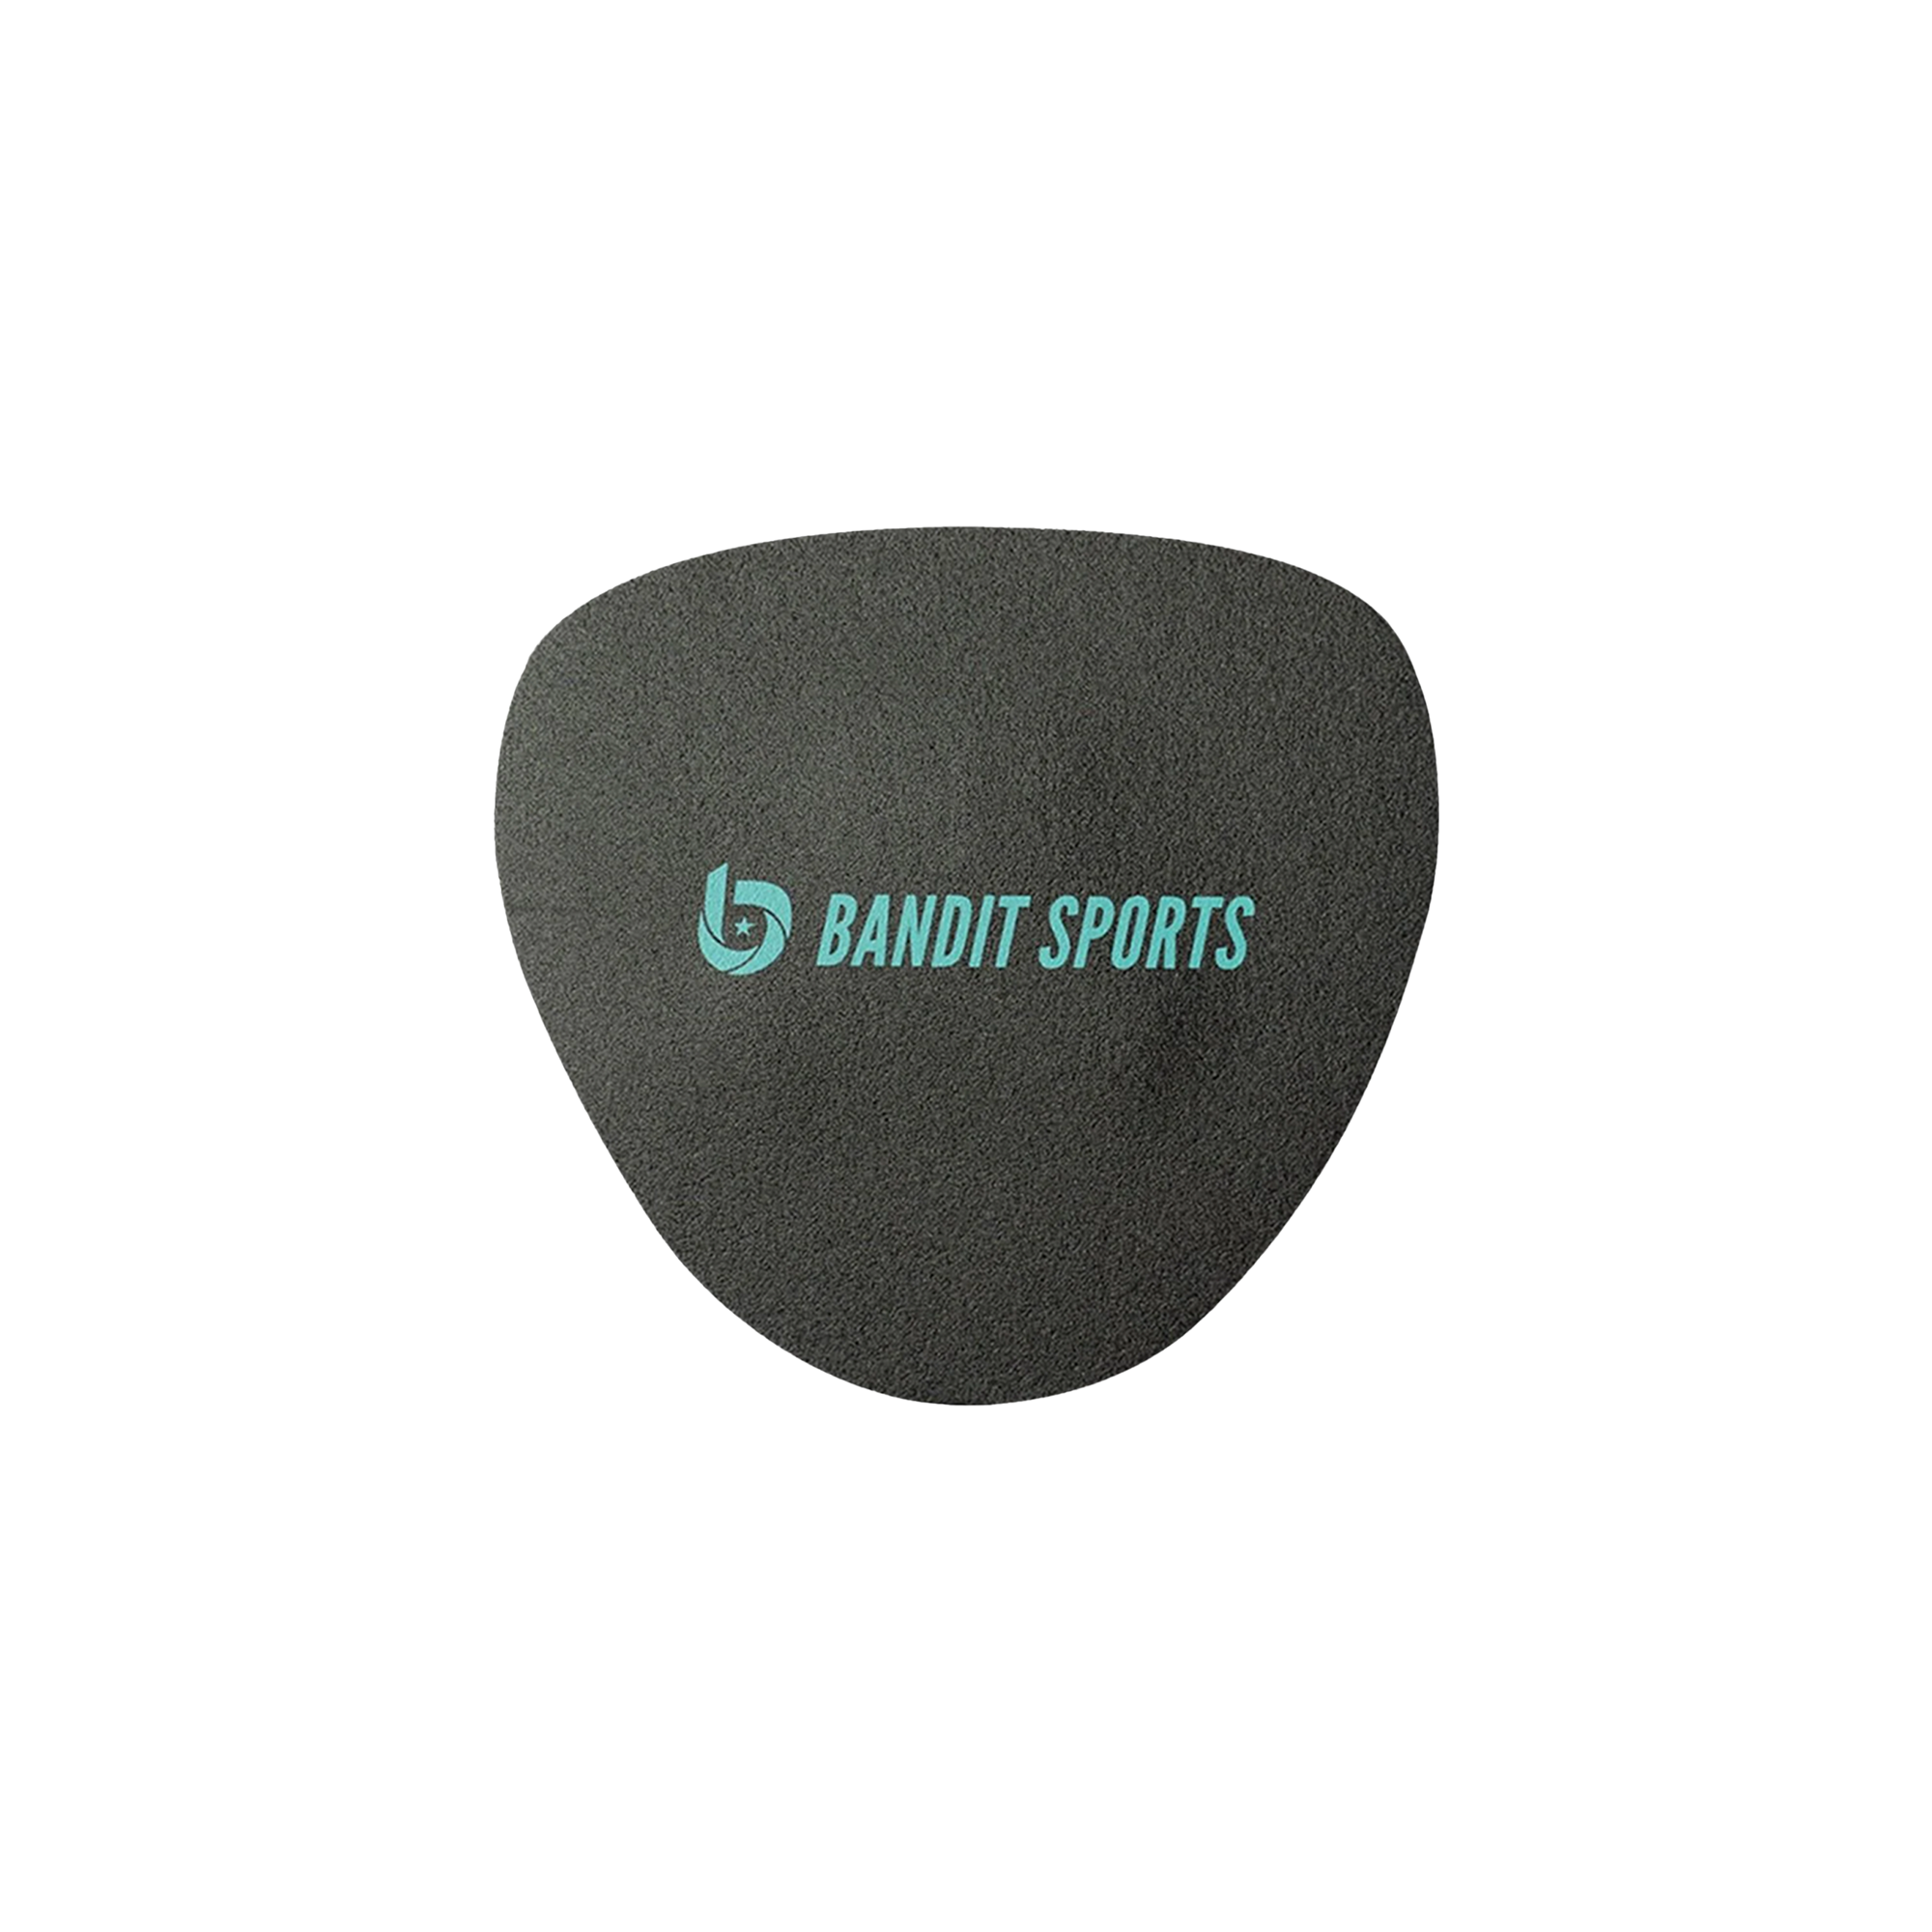 Mini soft hands from bandit sports